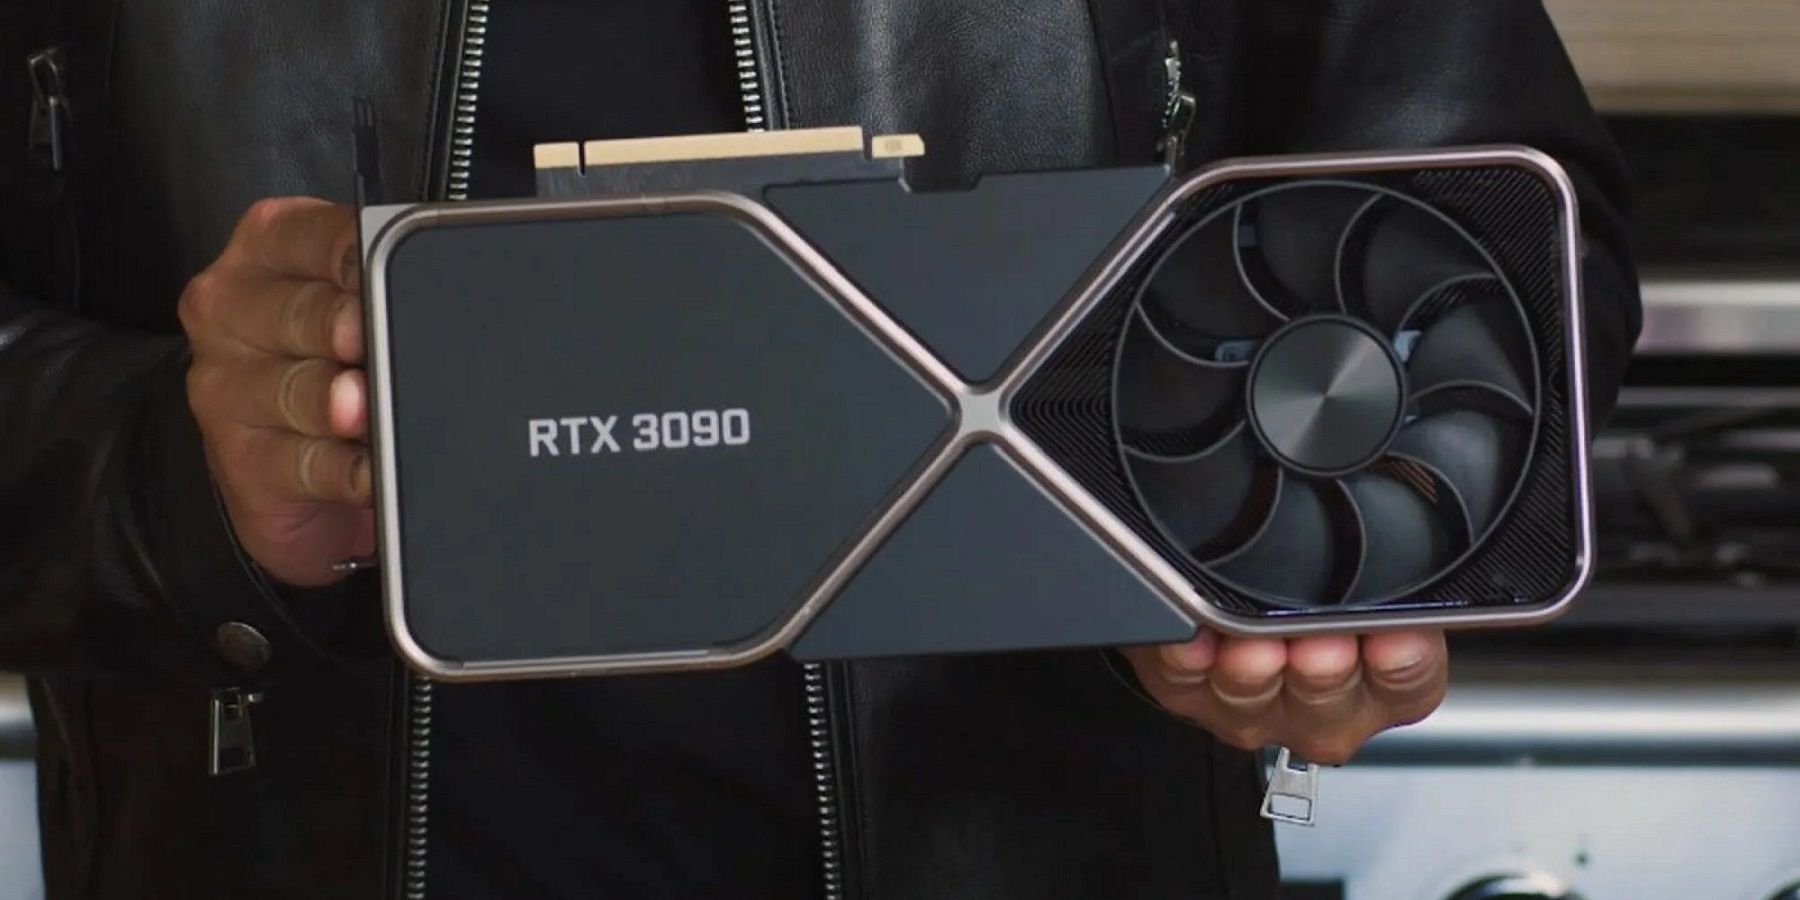 An image of Nvidia CEO's hands holding an RTX 3090 graphics cards.